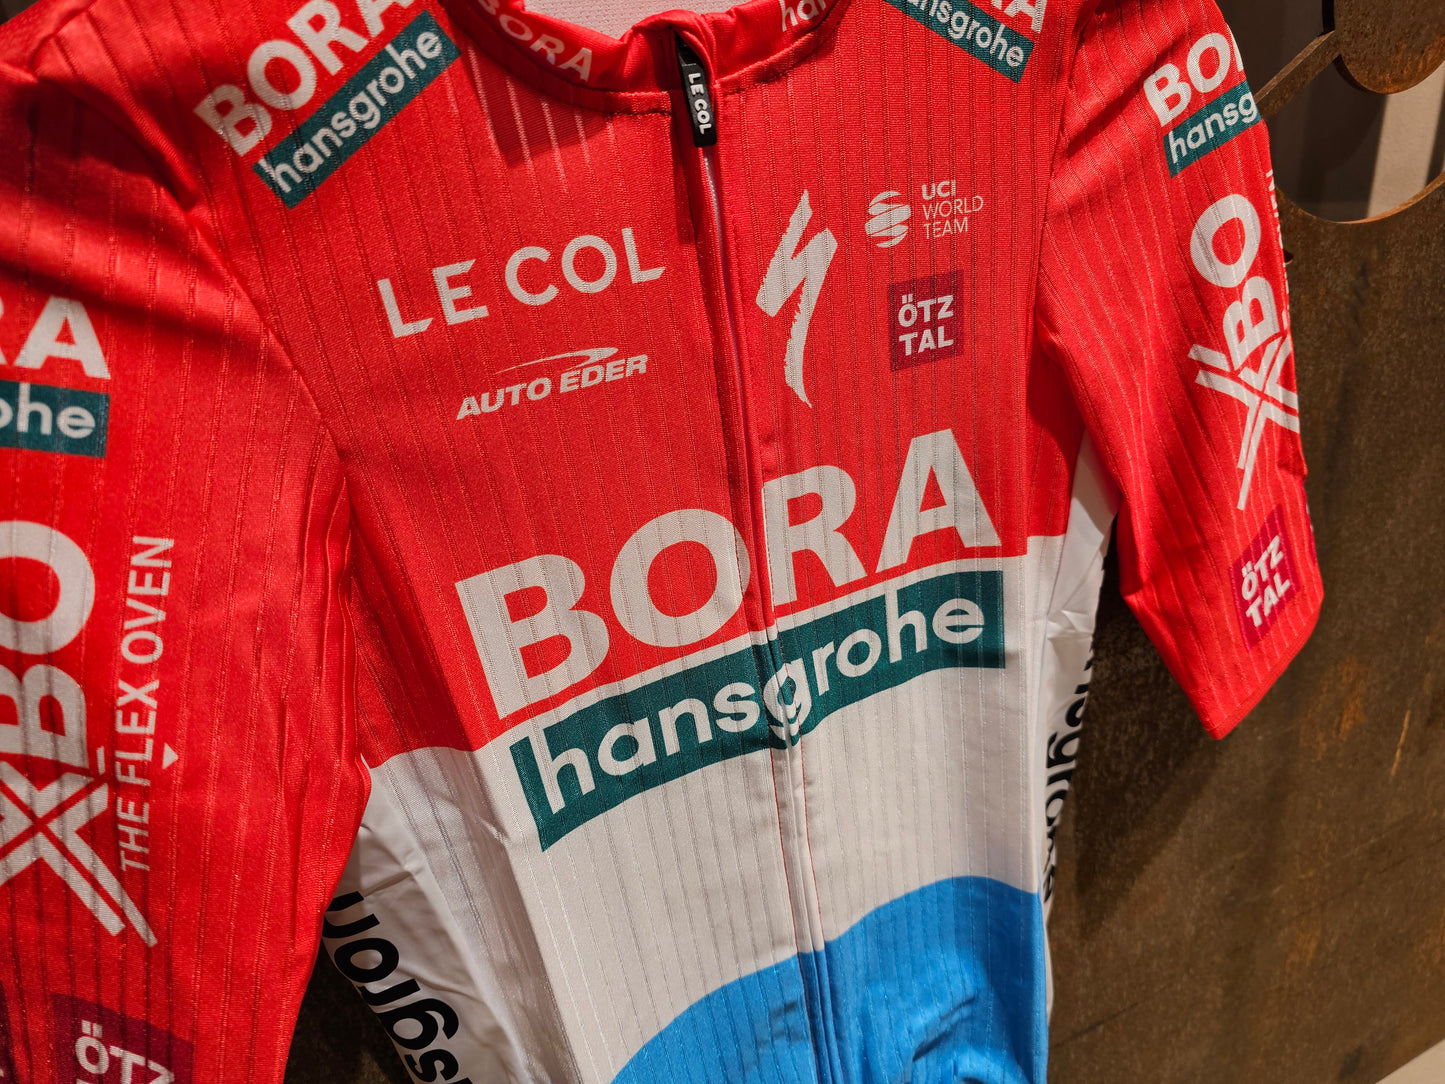 LE COL BORA HANSGROHE SS AERO JERSEY LUXEMBOURG CHAMPIONS - SHORT SLEEVE 2023